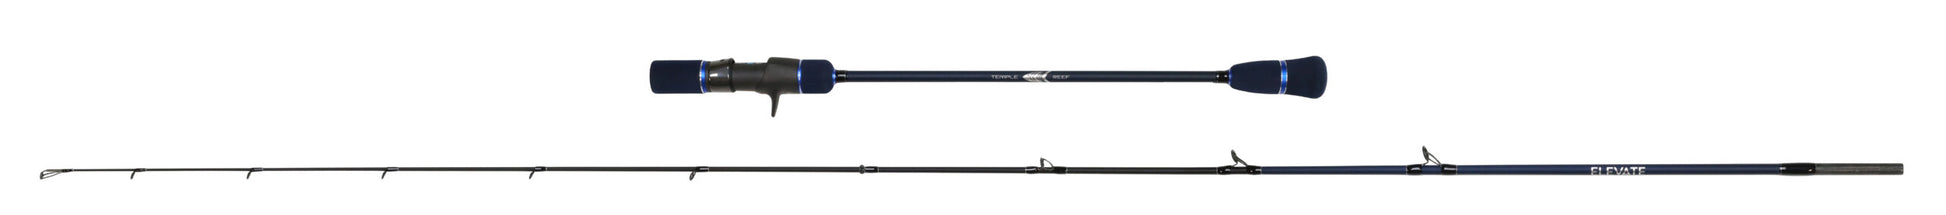 Slow Pitch Jigging Rod - Temple Reef - ELEVATE 2.0 (2021 New Model!)